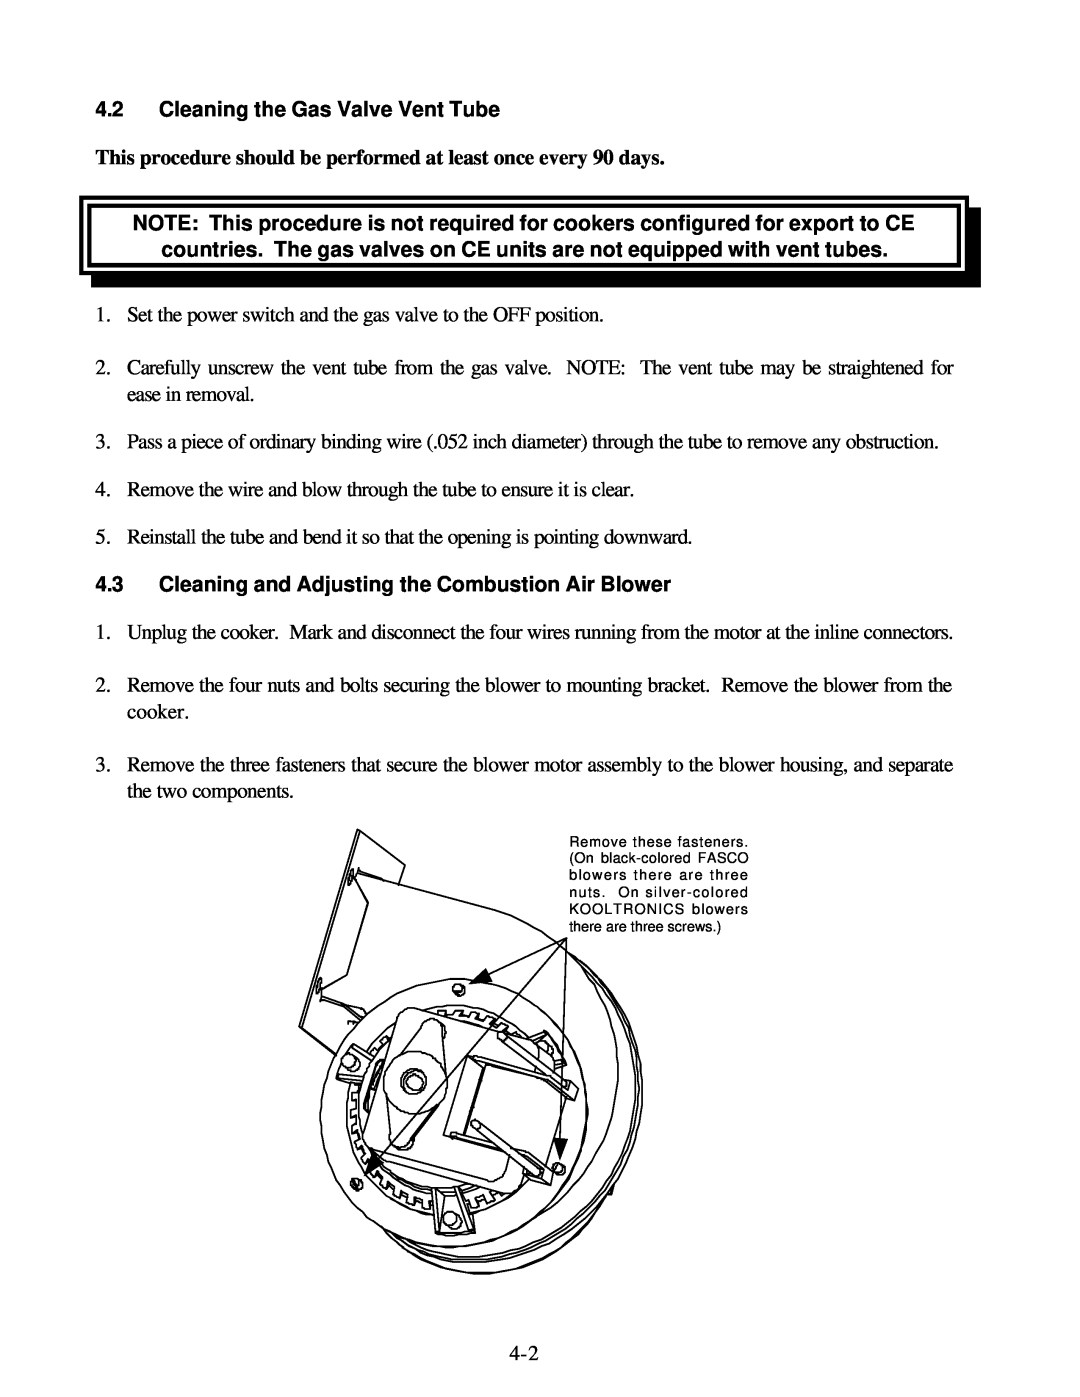 Frymaster GBC, GSMS, GC operation manual 4.2Cleaning the Gas Valve Vent Tube 